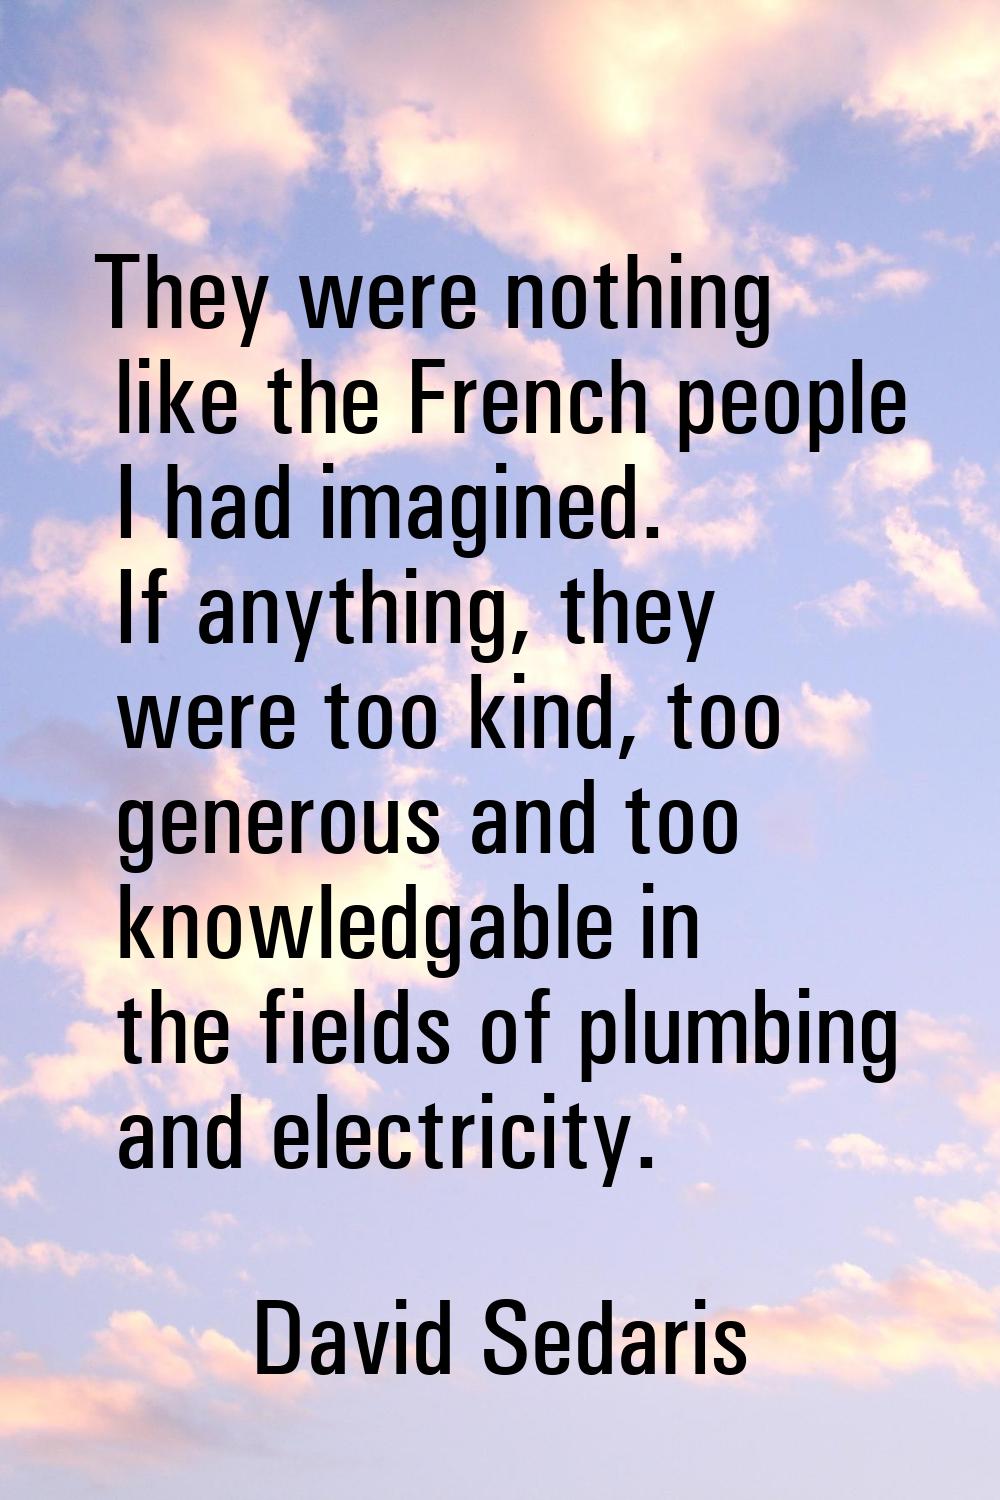 They were nothing like the French people I had imagined. If anything, they were too kind, too gener